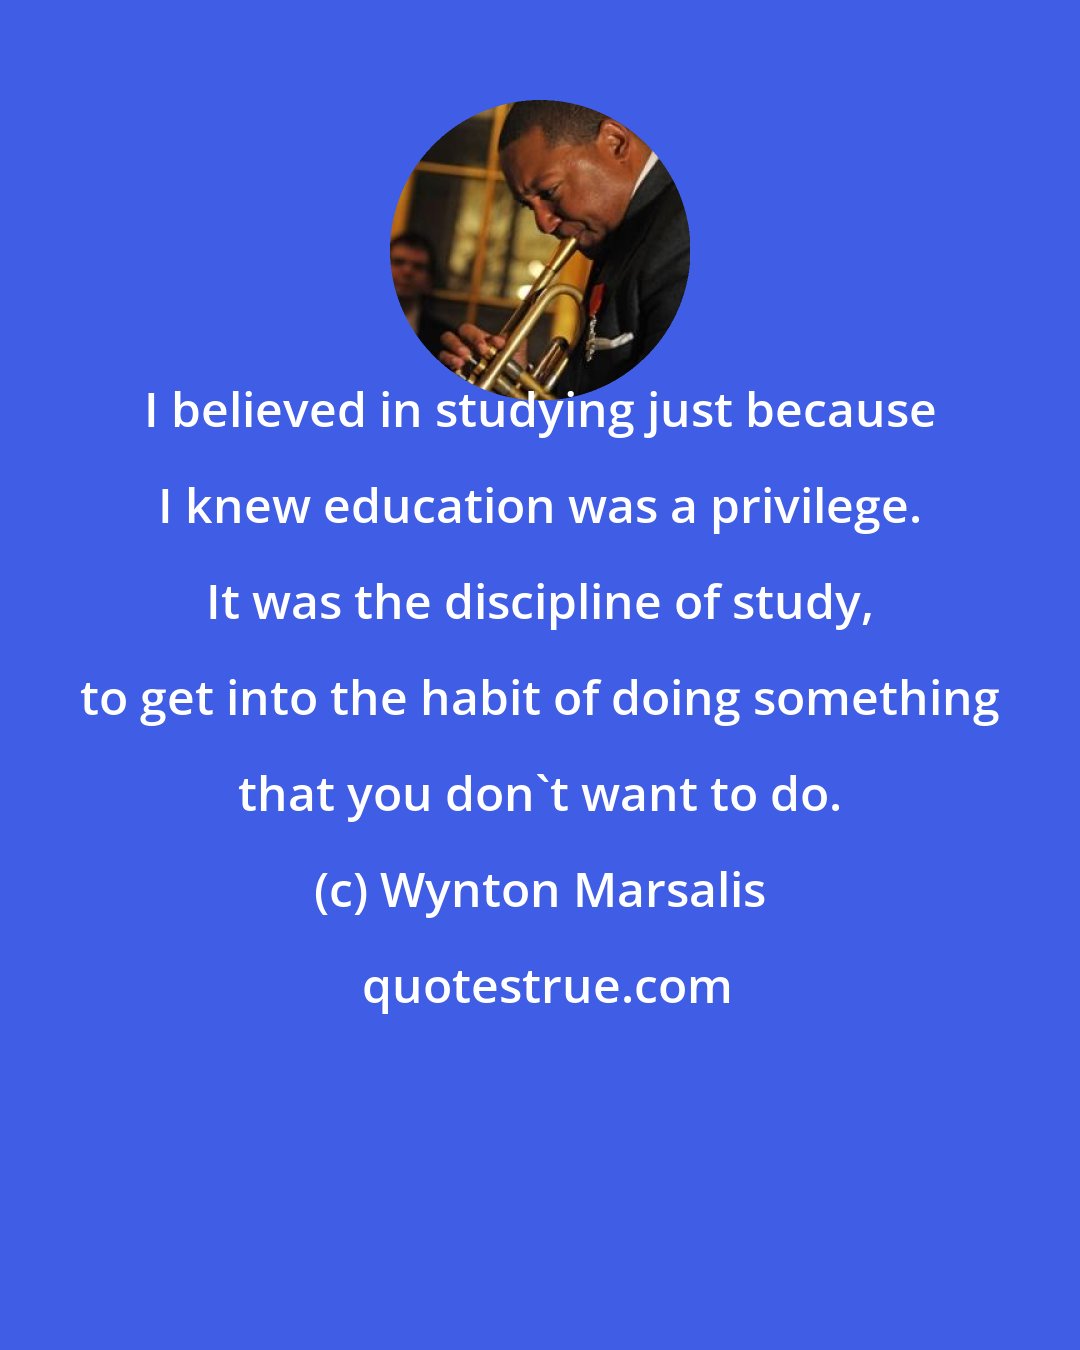 Wynton Marsalis: I believed in studying just because I knew education was a privilege. It was the discipline of study, to get into the habit of doing something that you don't want to do.